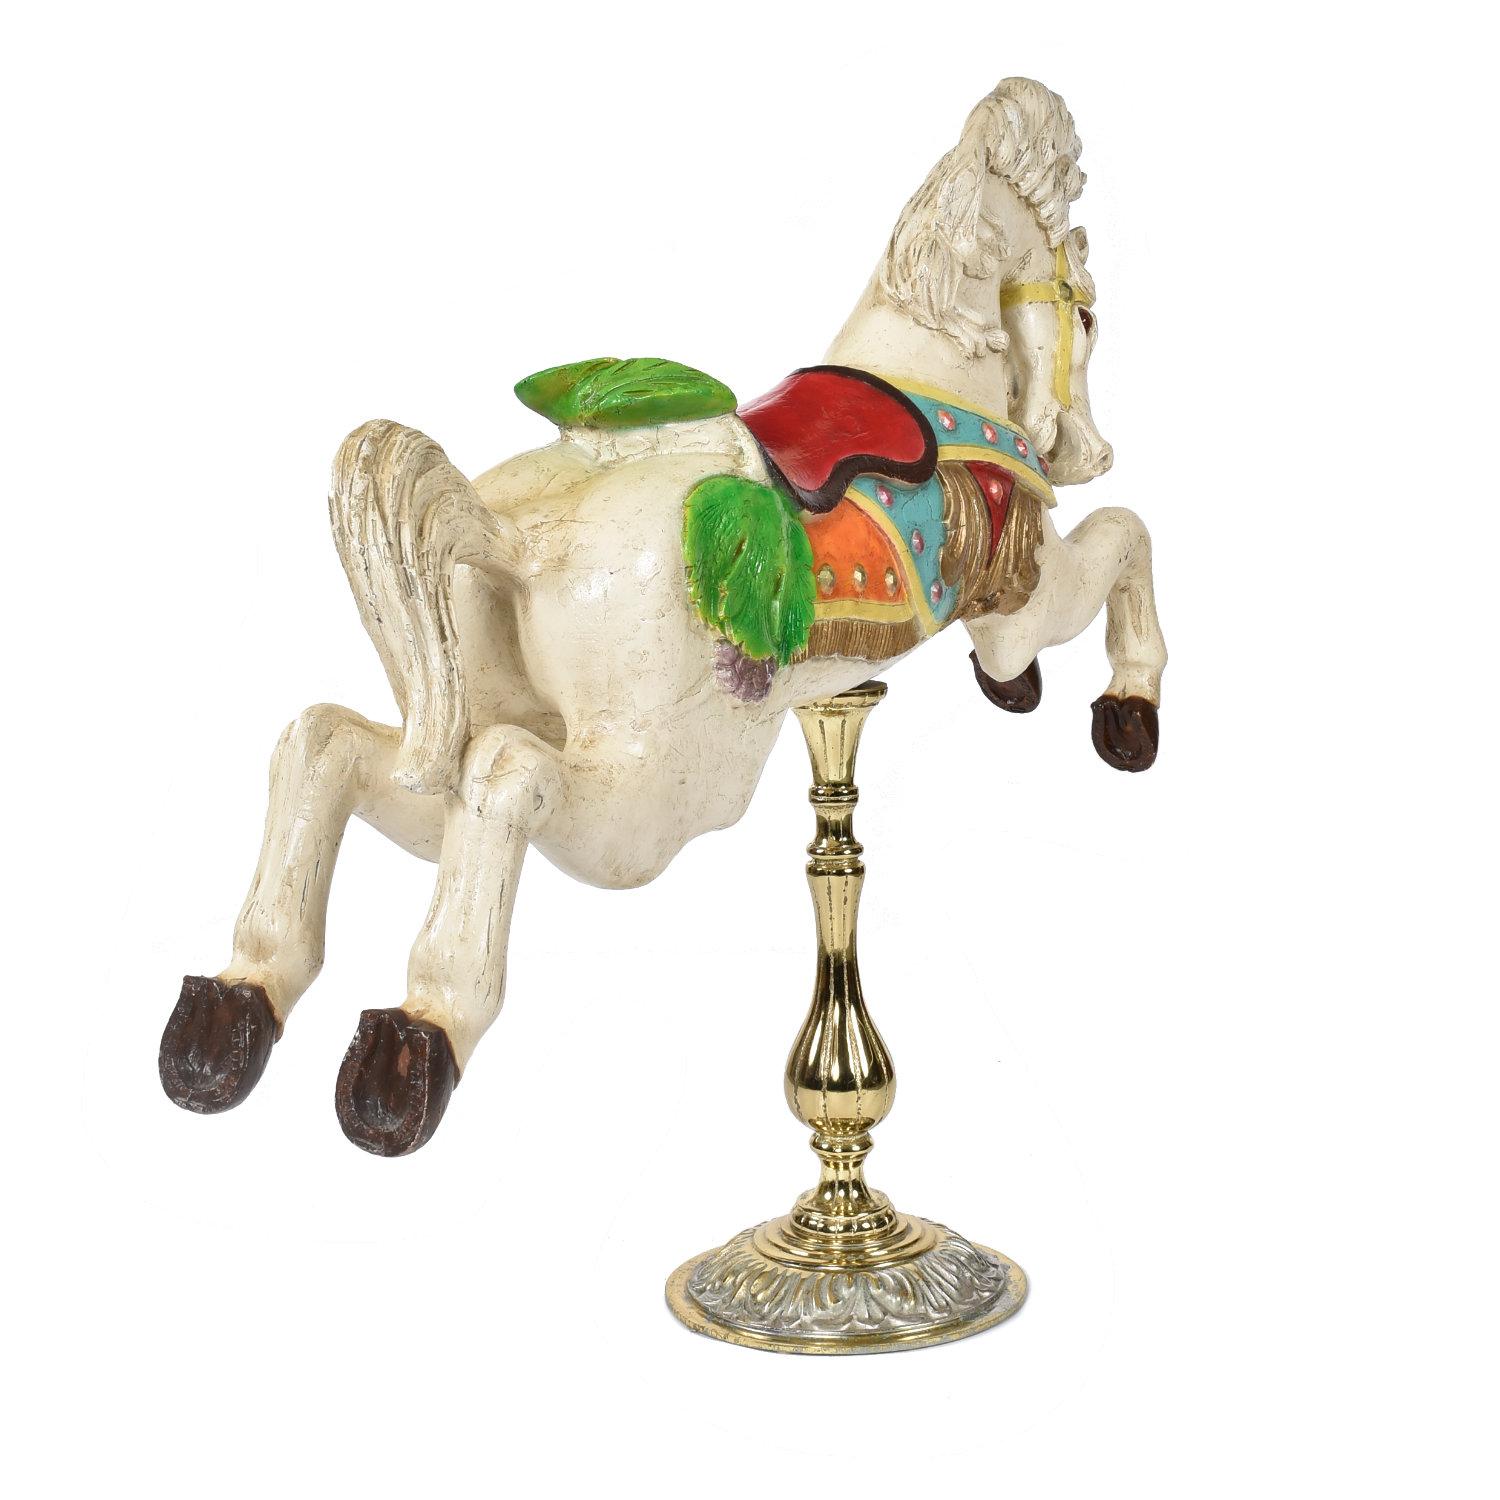 Unknown Hand Painted Midcentury Resin White Jumper Carousel Horse by C.W. Parker For Sale